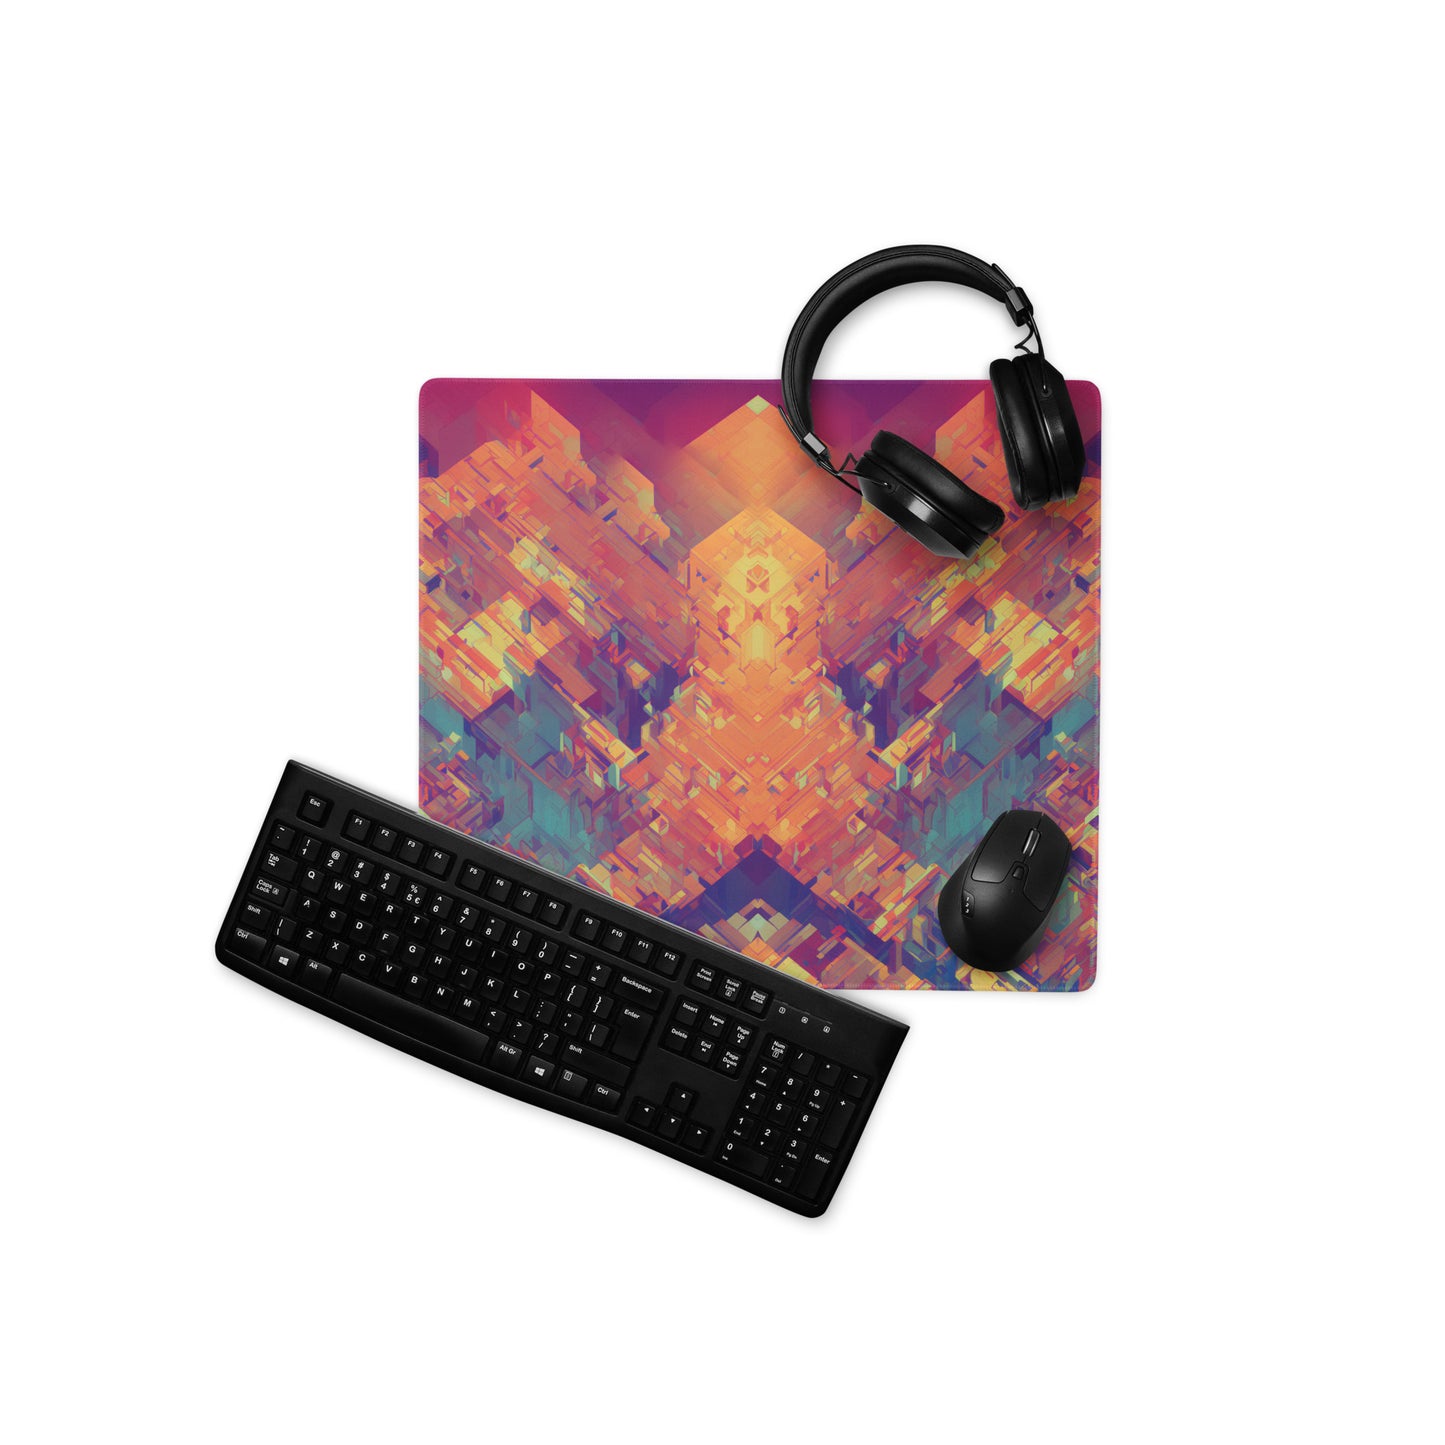 Retro Cubist : Gaming mouse pad